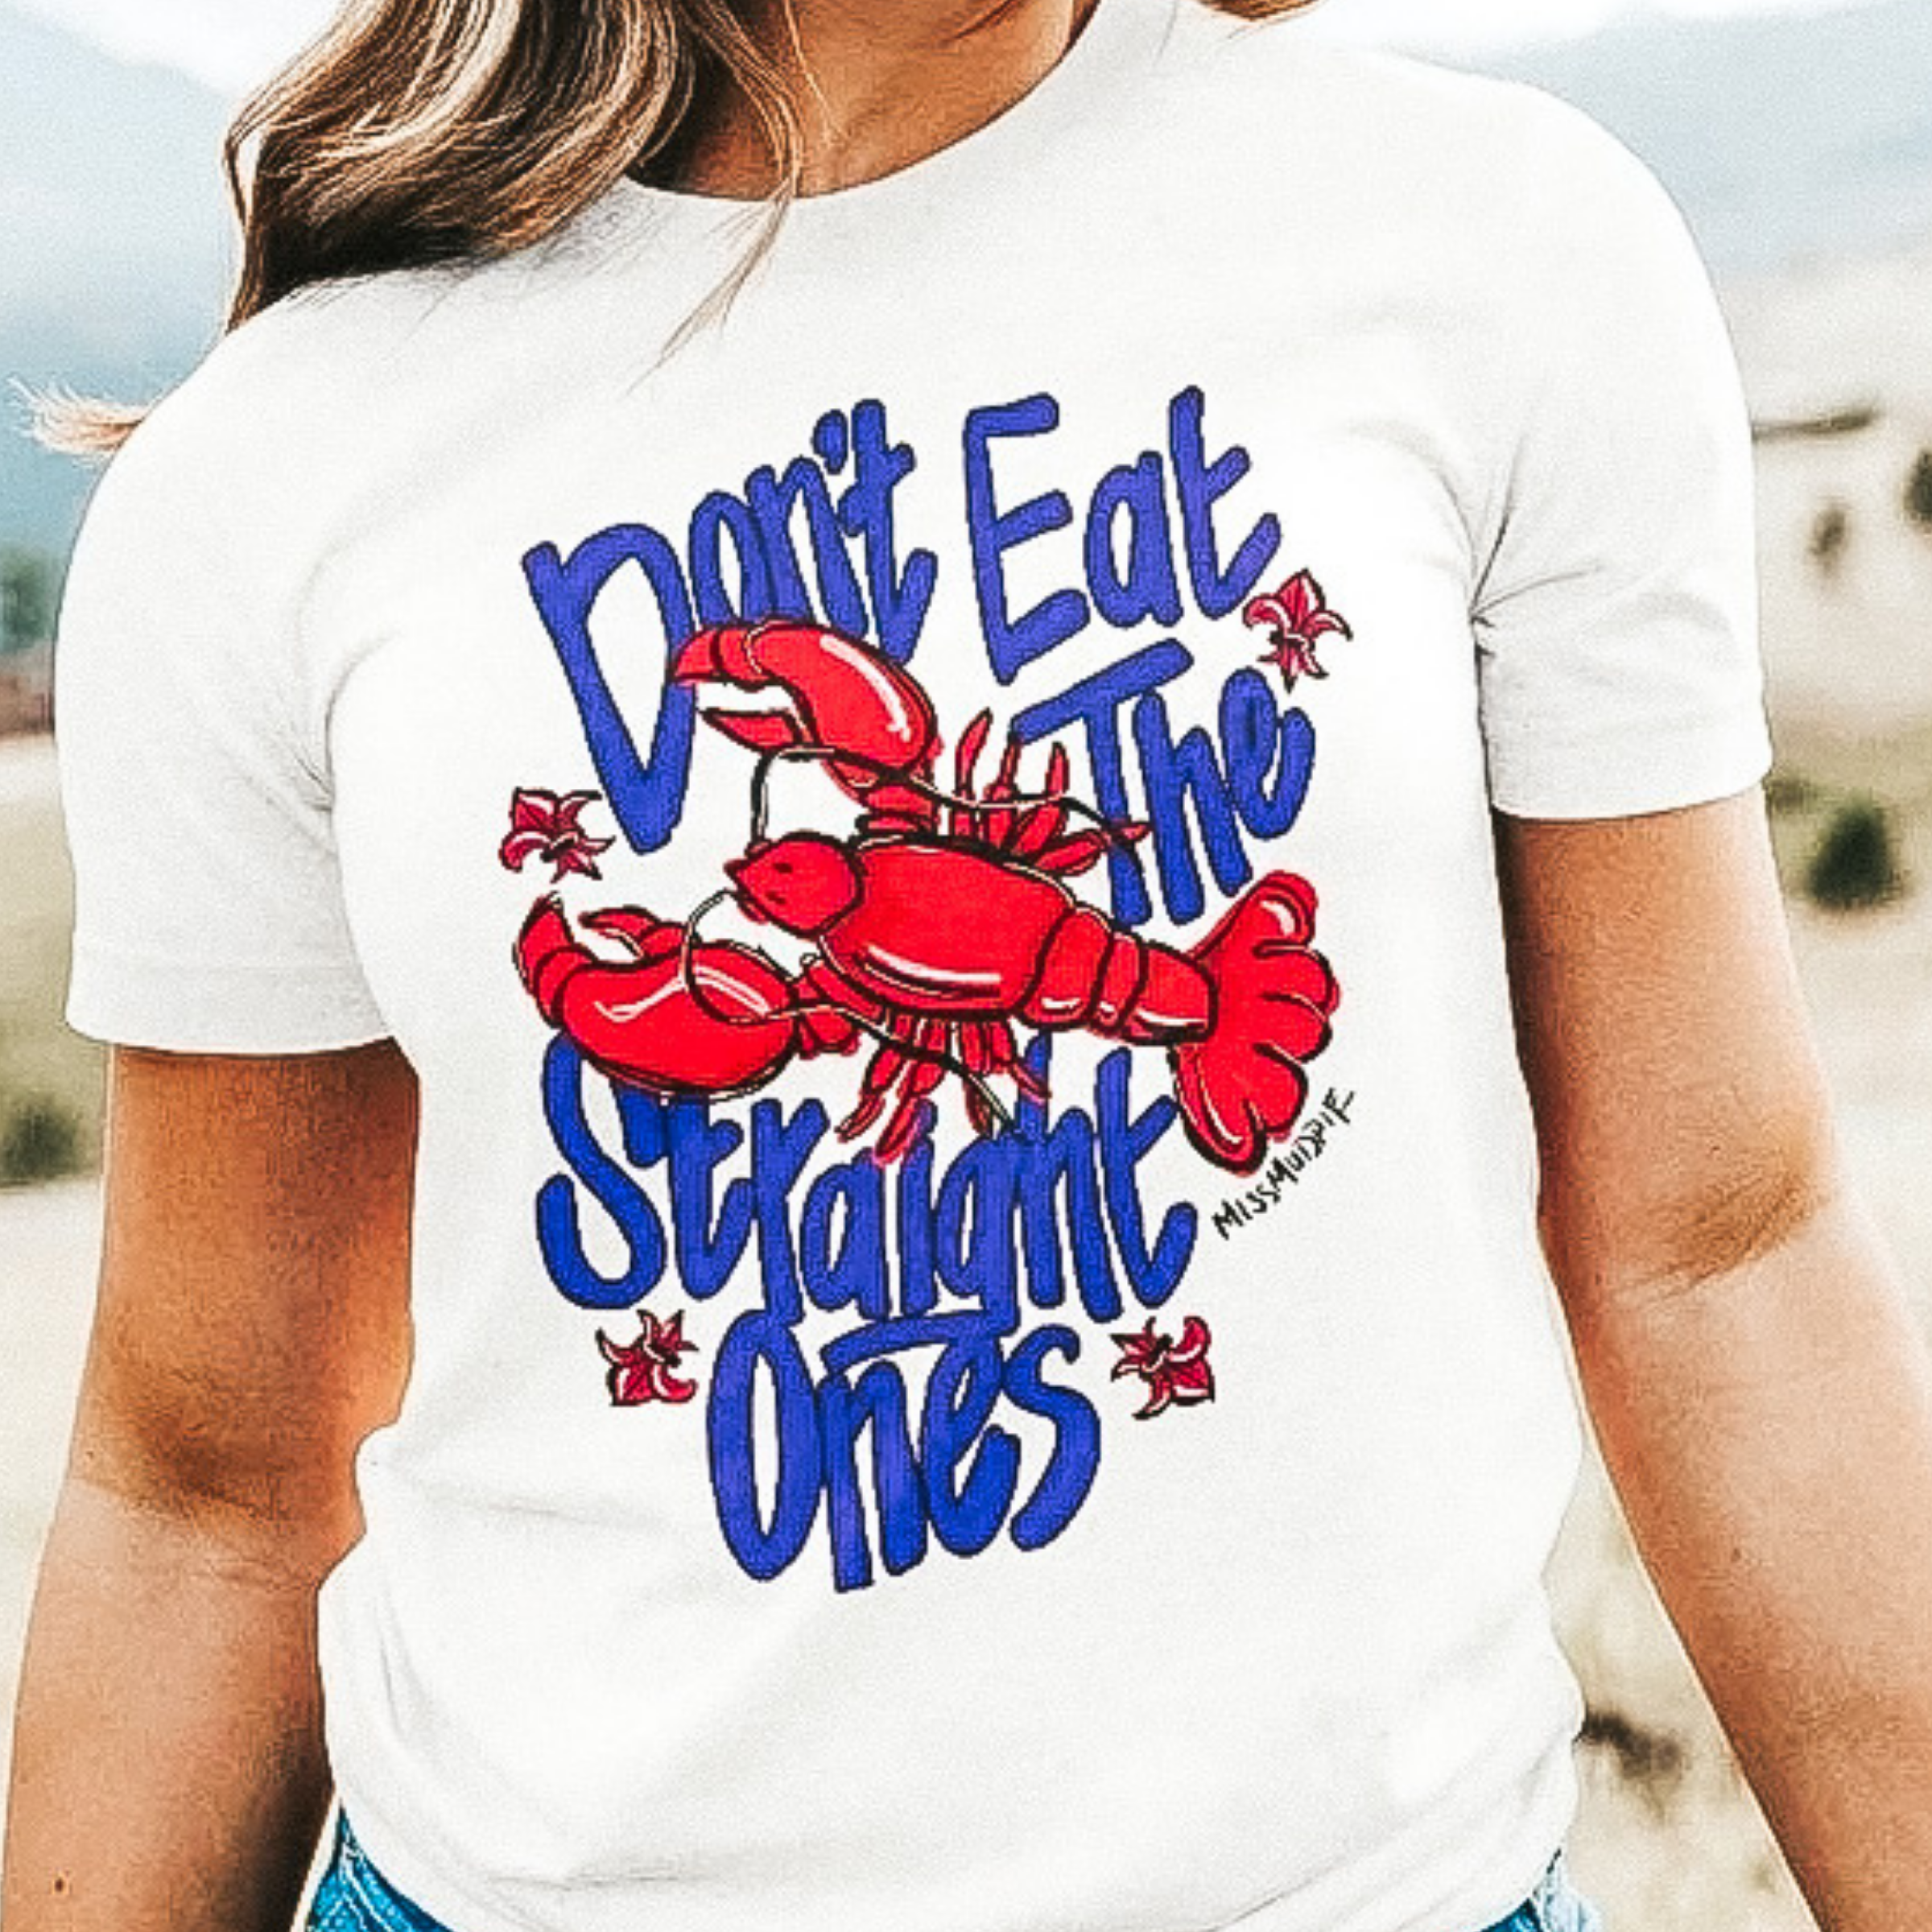 A white crew neck tee shirt with short sleeves. The tee has a graphic that says "Don't eat the straight ones" with a picture of a red crawfish.